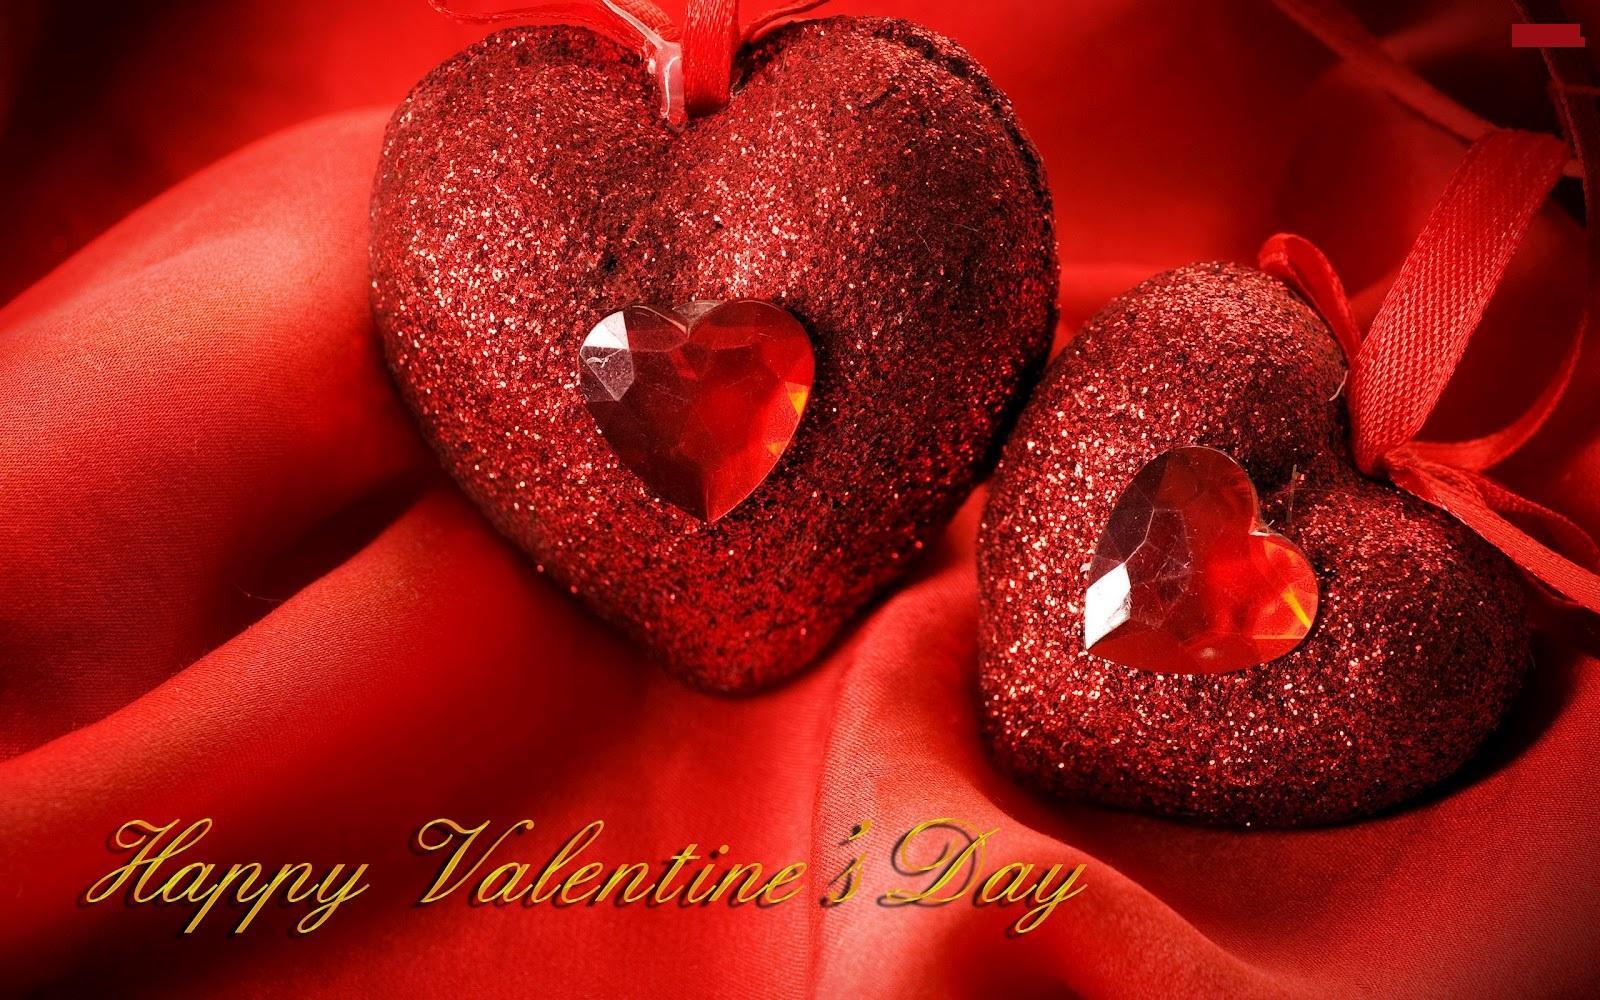 Happy Valentines Day Wishes February 2020. Download